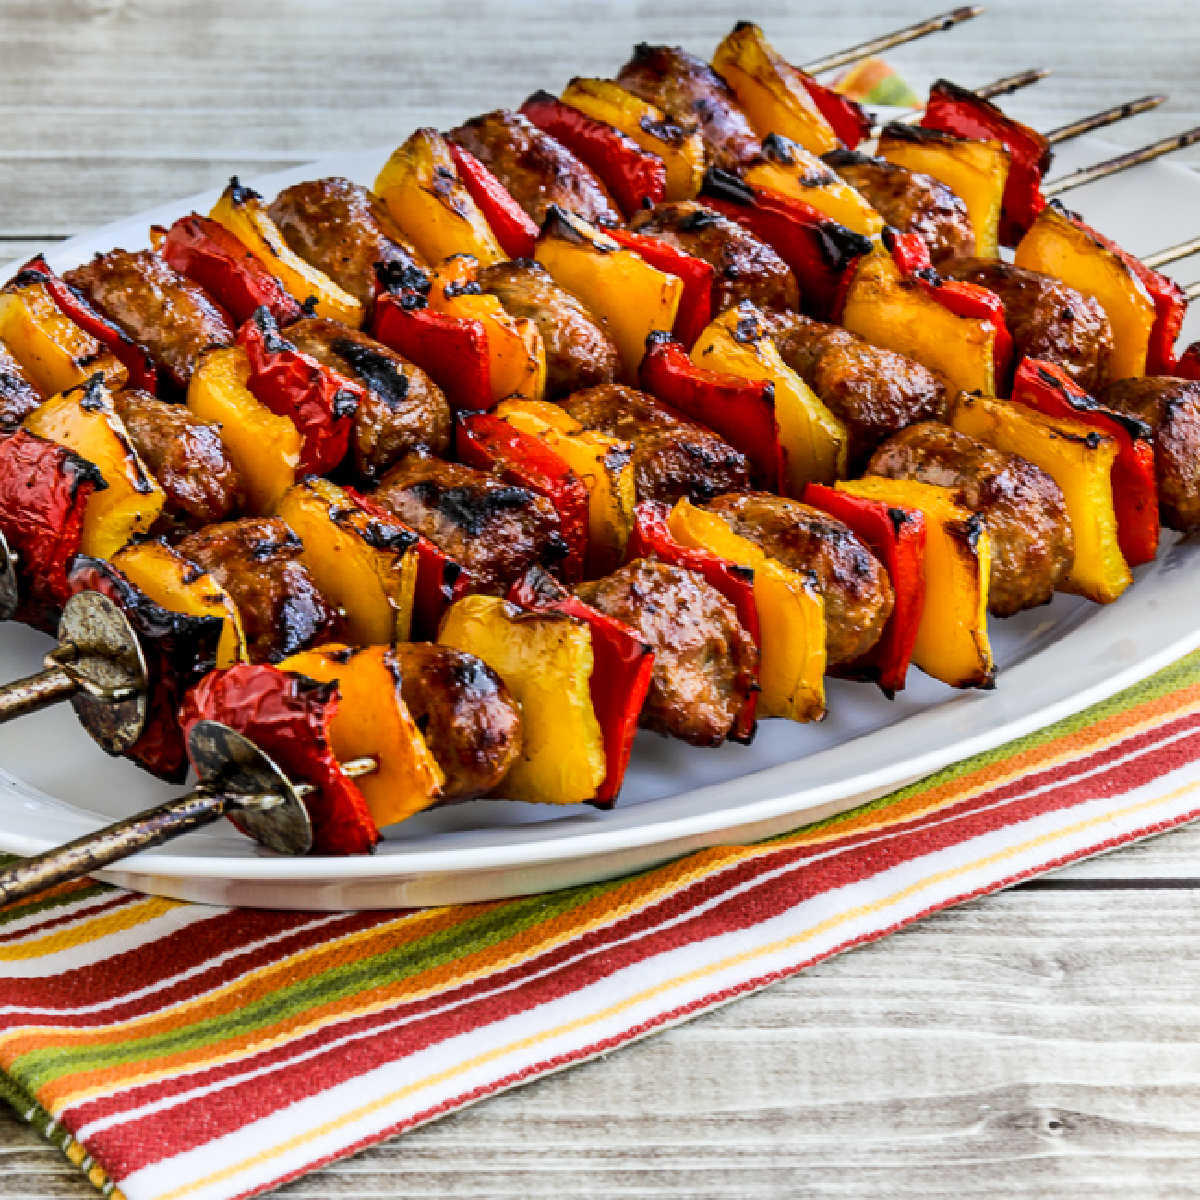 square image of Grilled Sausage and Peppers shown on skewers on serving plate